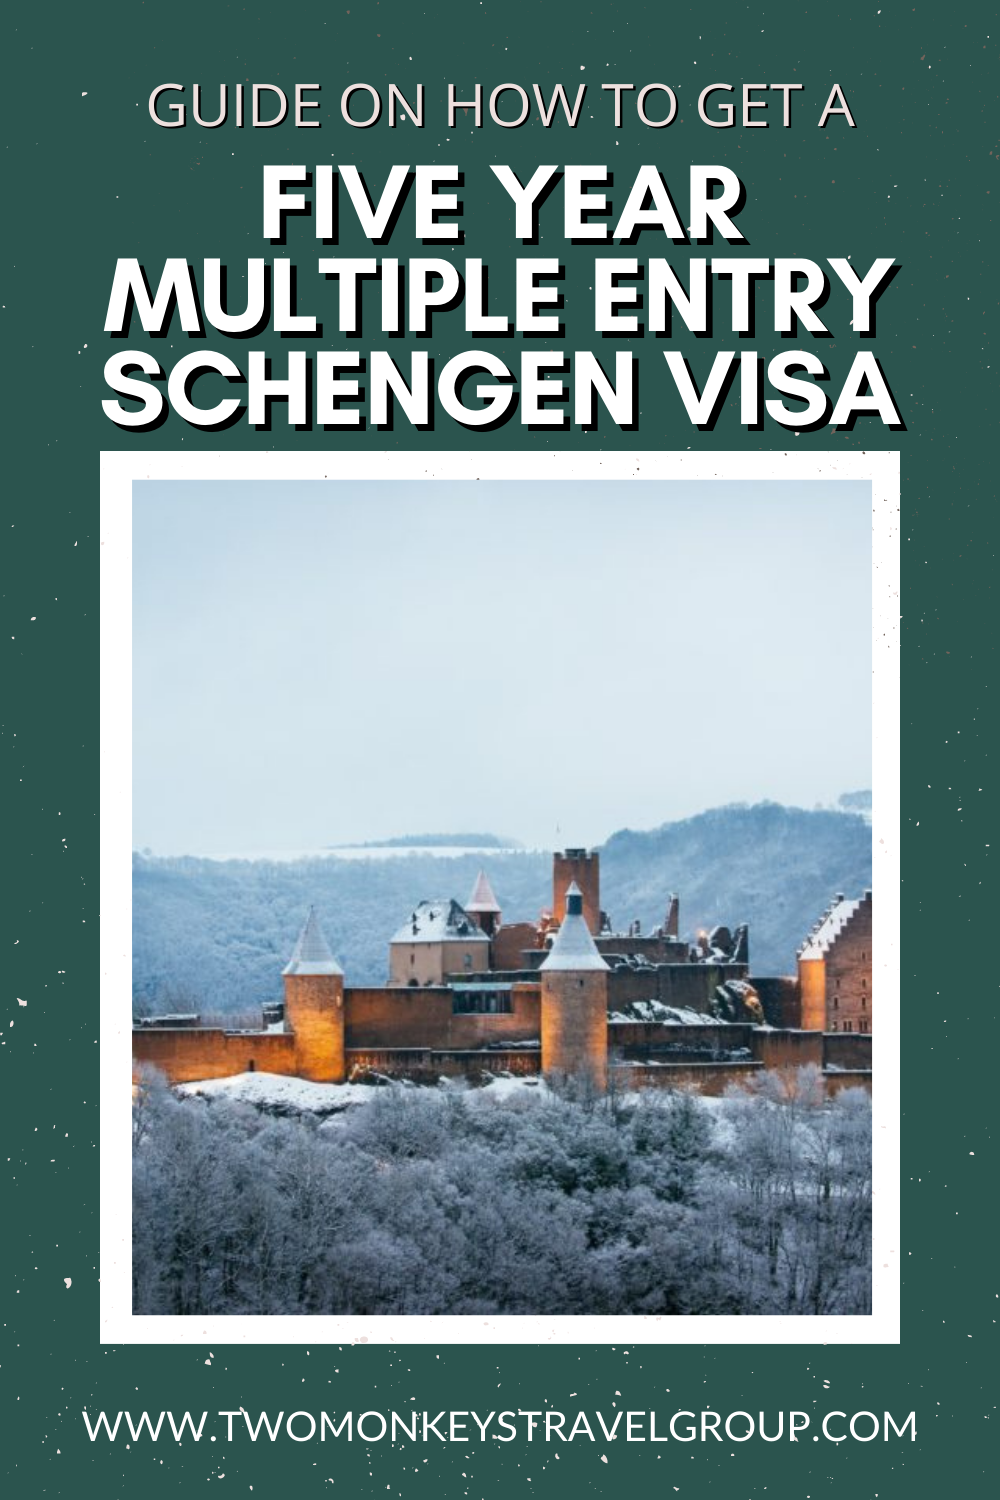 How to Get a Five Year Multiple Entry Schengen Visa for Filipino Citizens